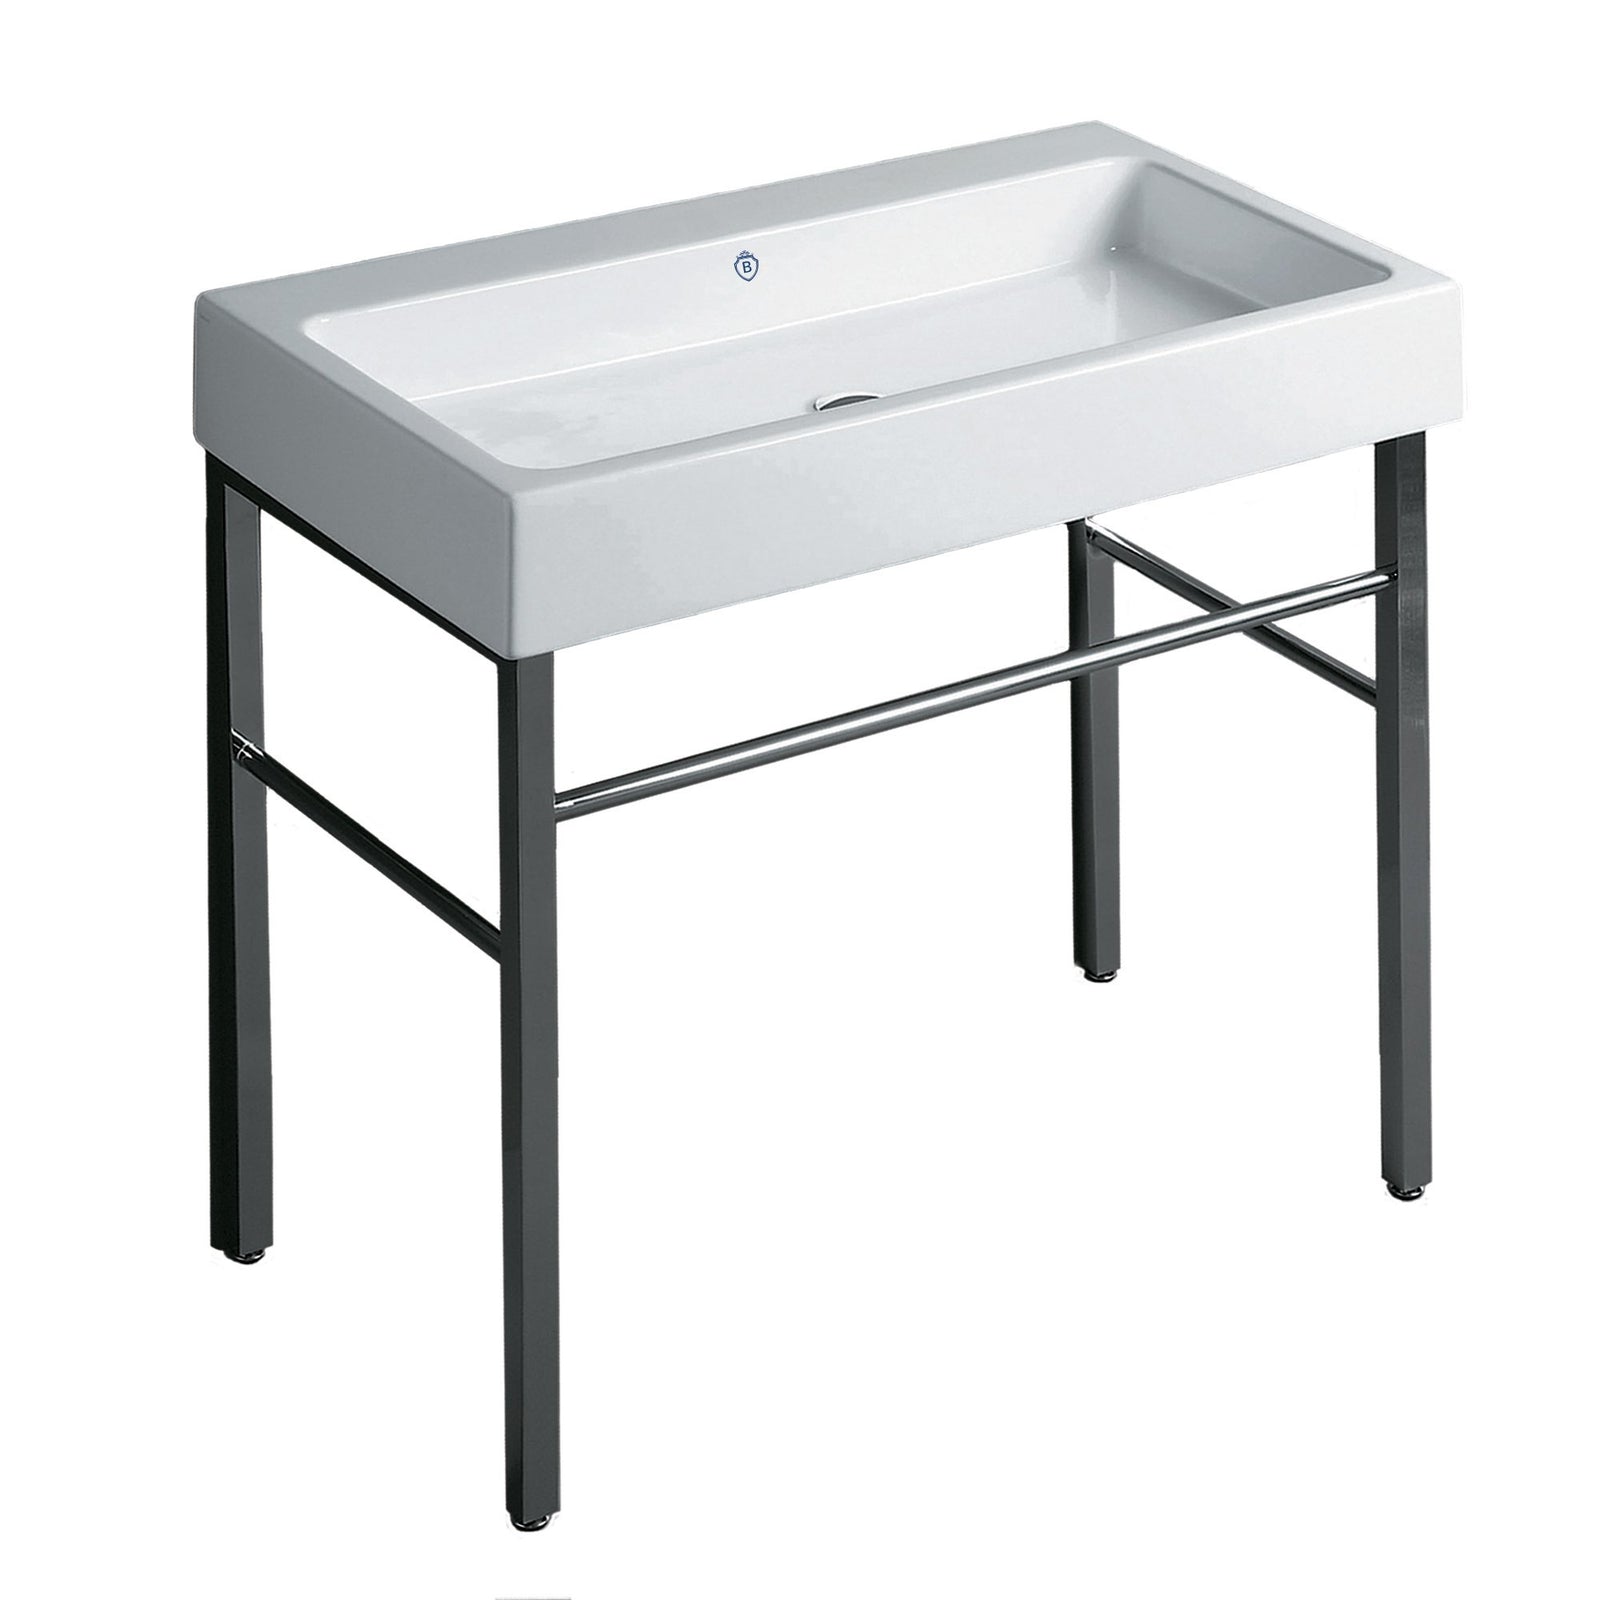 Console Sinks - Whitehaus Collection